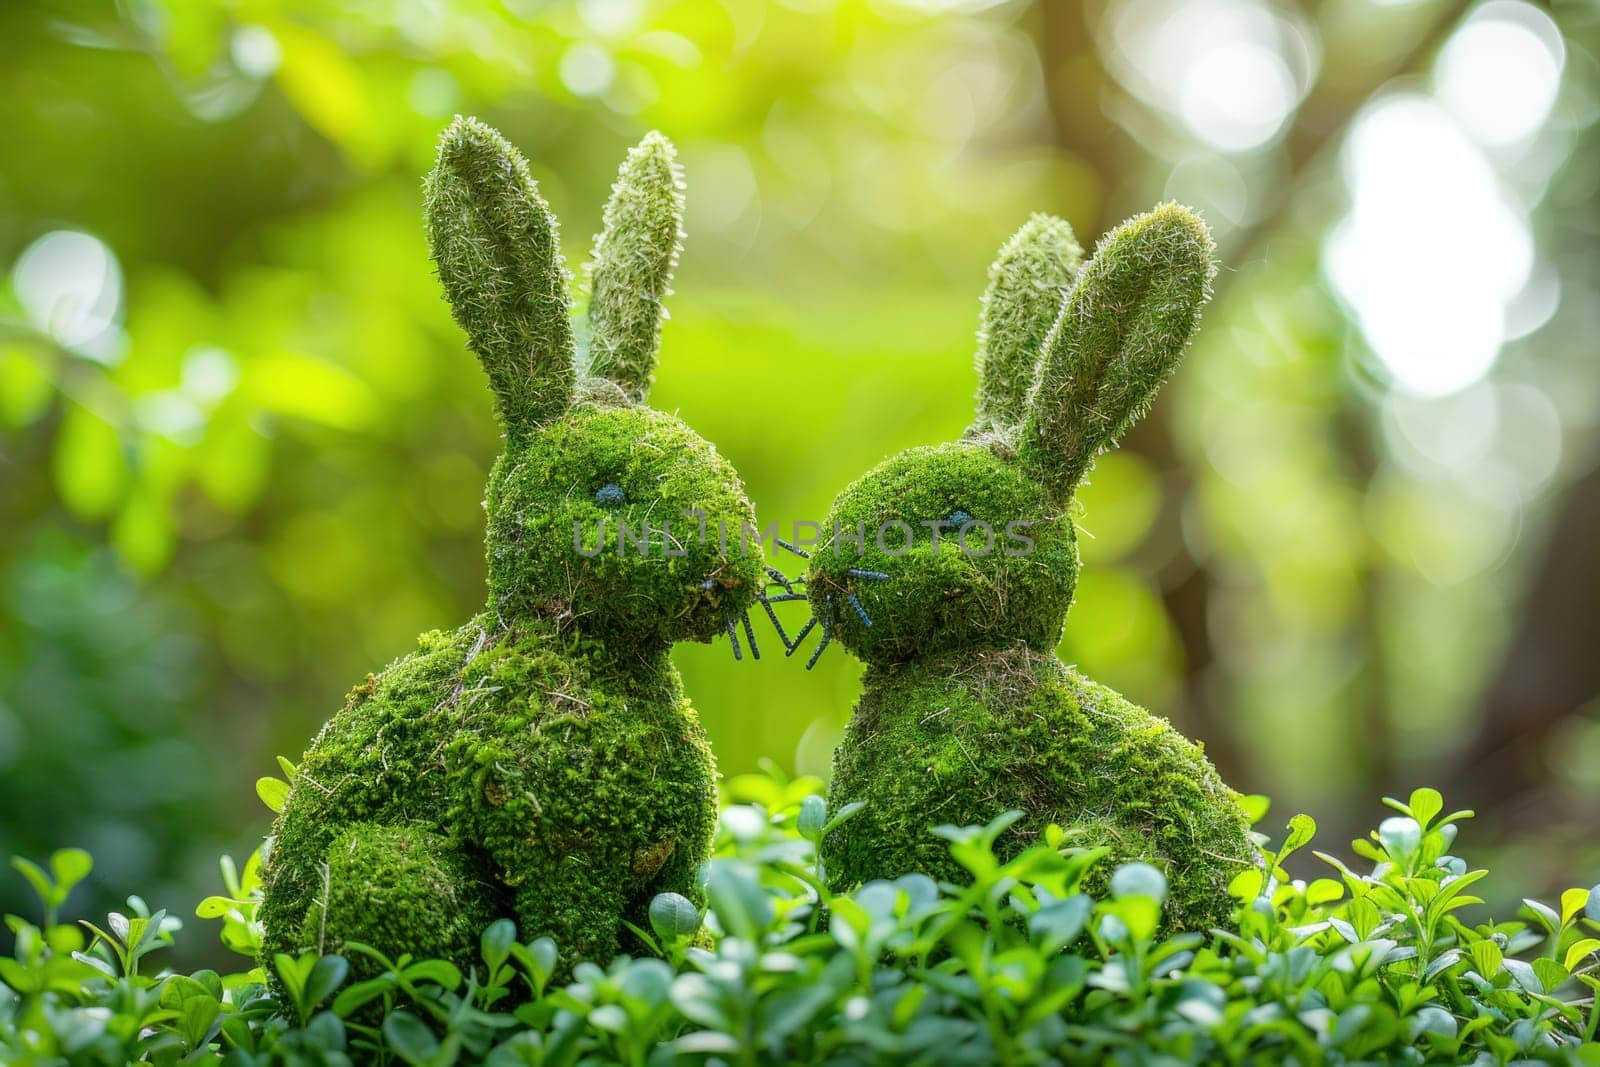 Two adorable moss bunny sculptures in a serene natural setting with lush greenery and trees surrounding by Vichizh